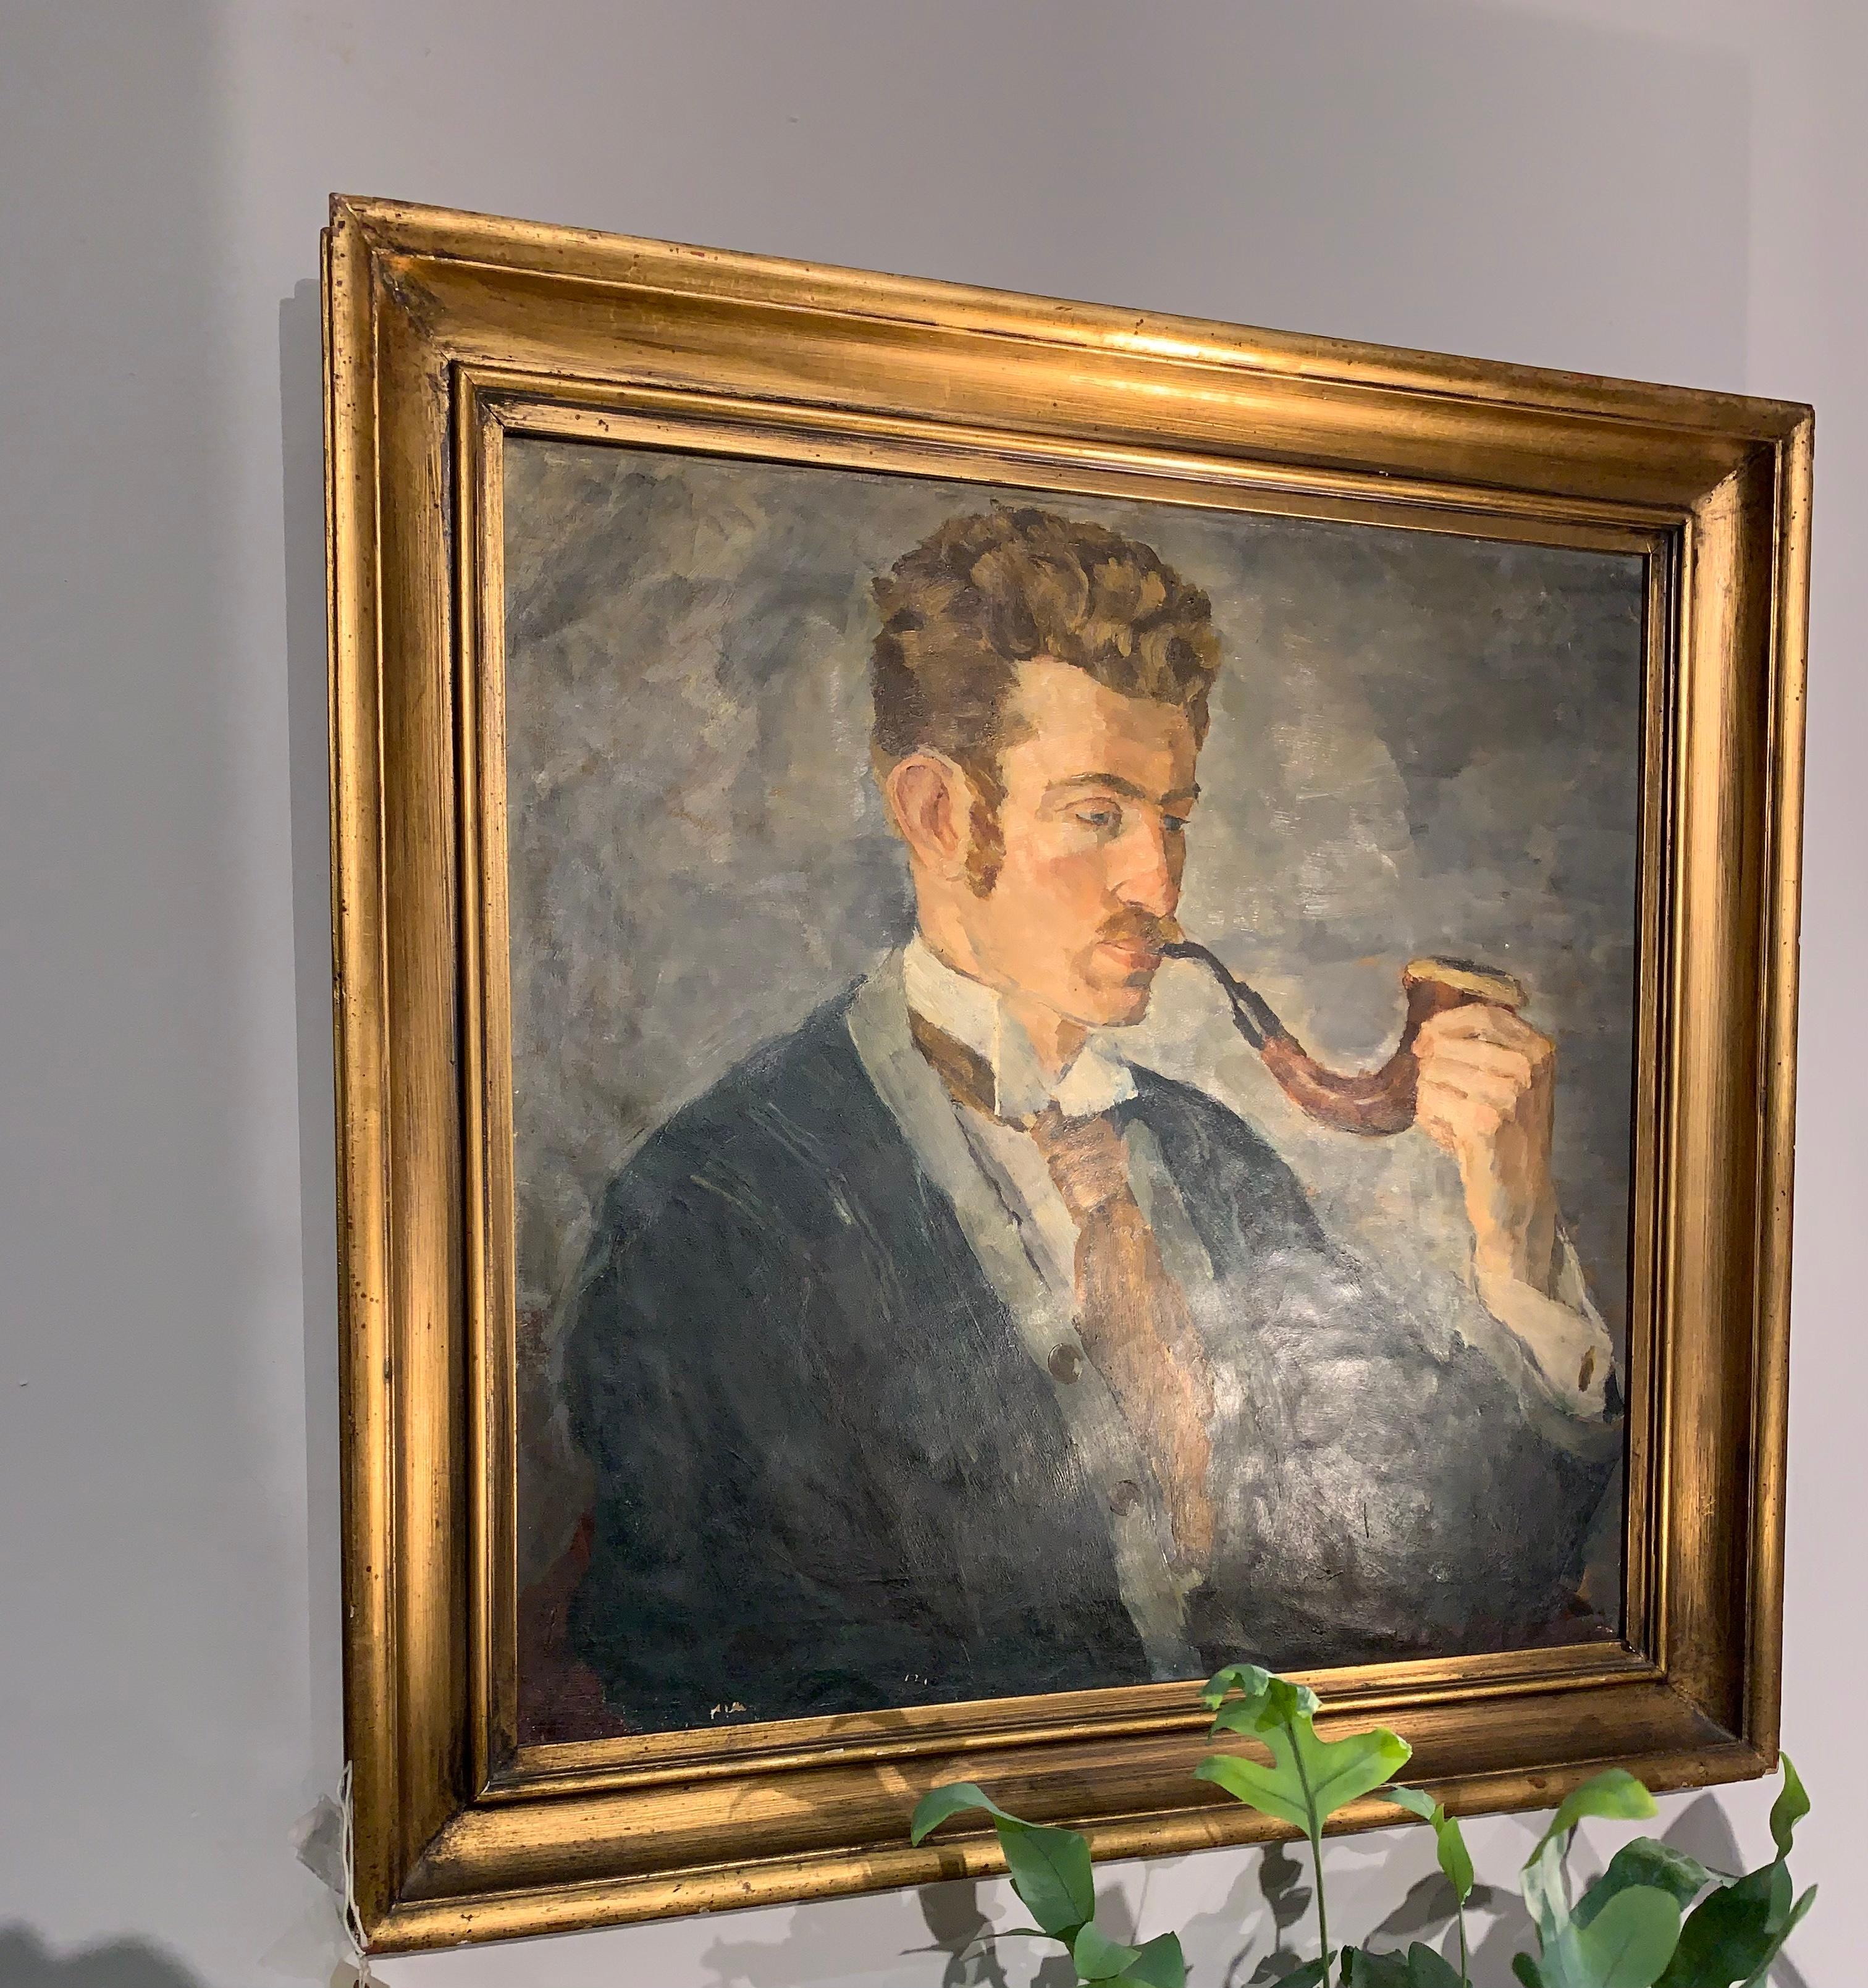 Charming circa 1920s framed oil painting of a gentleman wearing a shirt, tie and waistcoat beneath a blue jacket smoking a large pipe.
He has an almost scholarly look and was painted and signed by Swedish artist Albert Hoffsten who died at the age